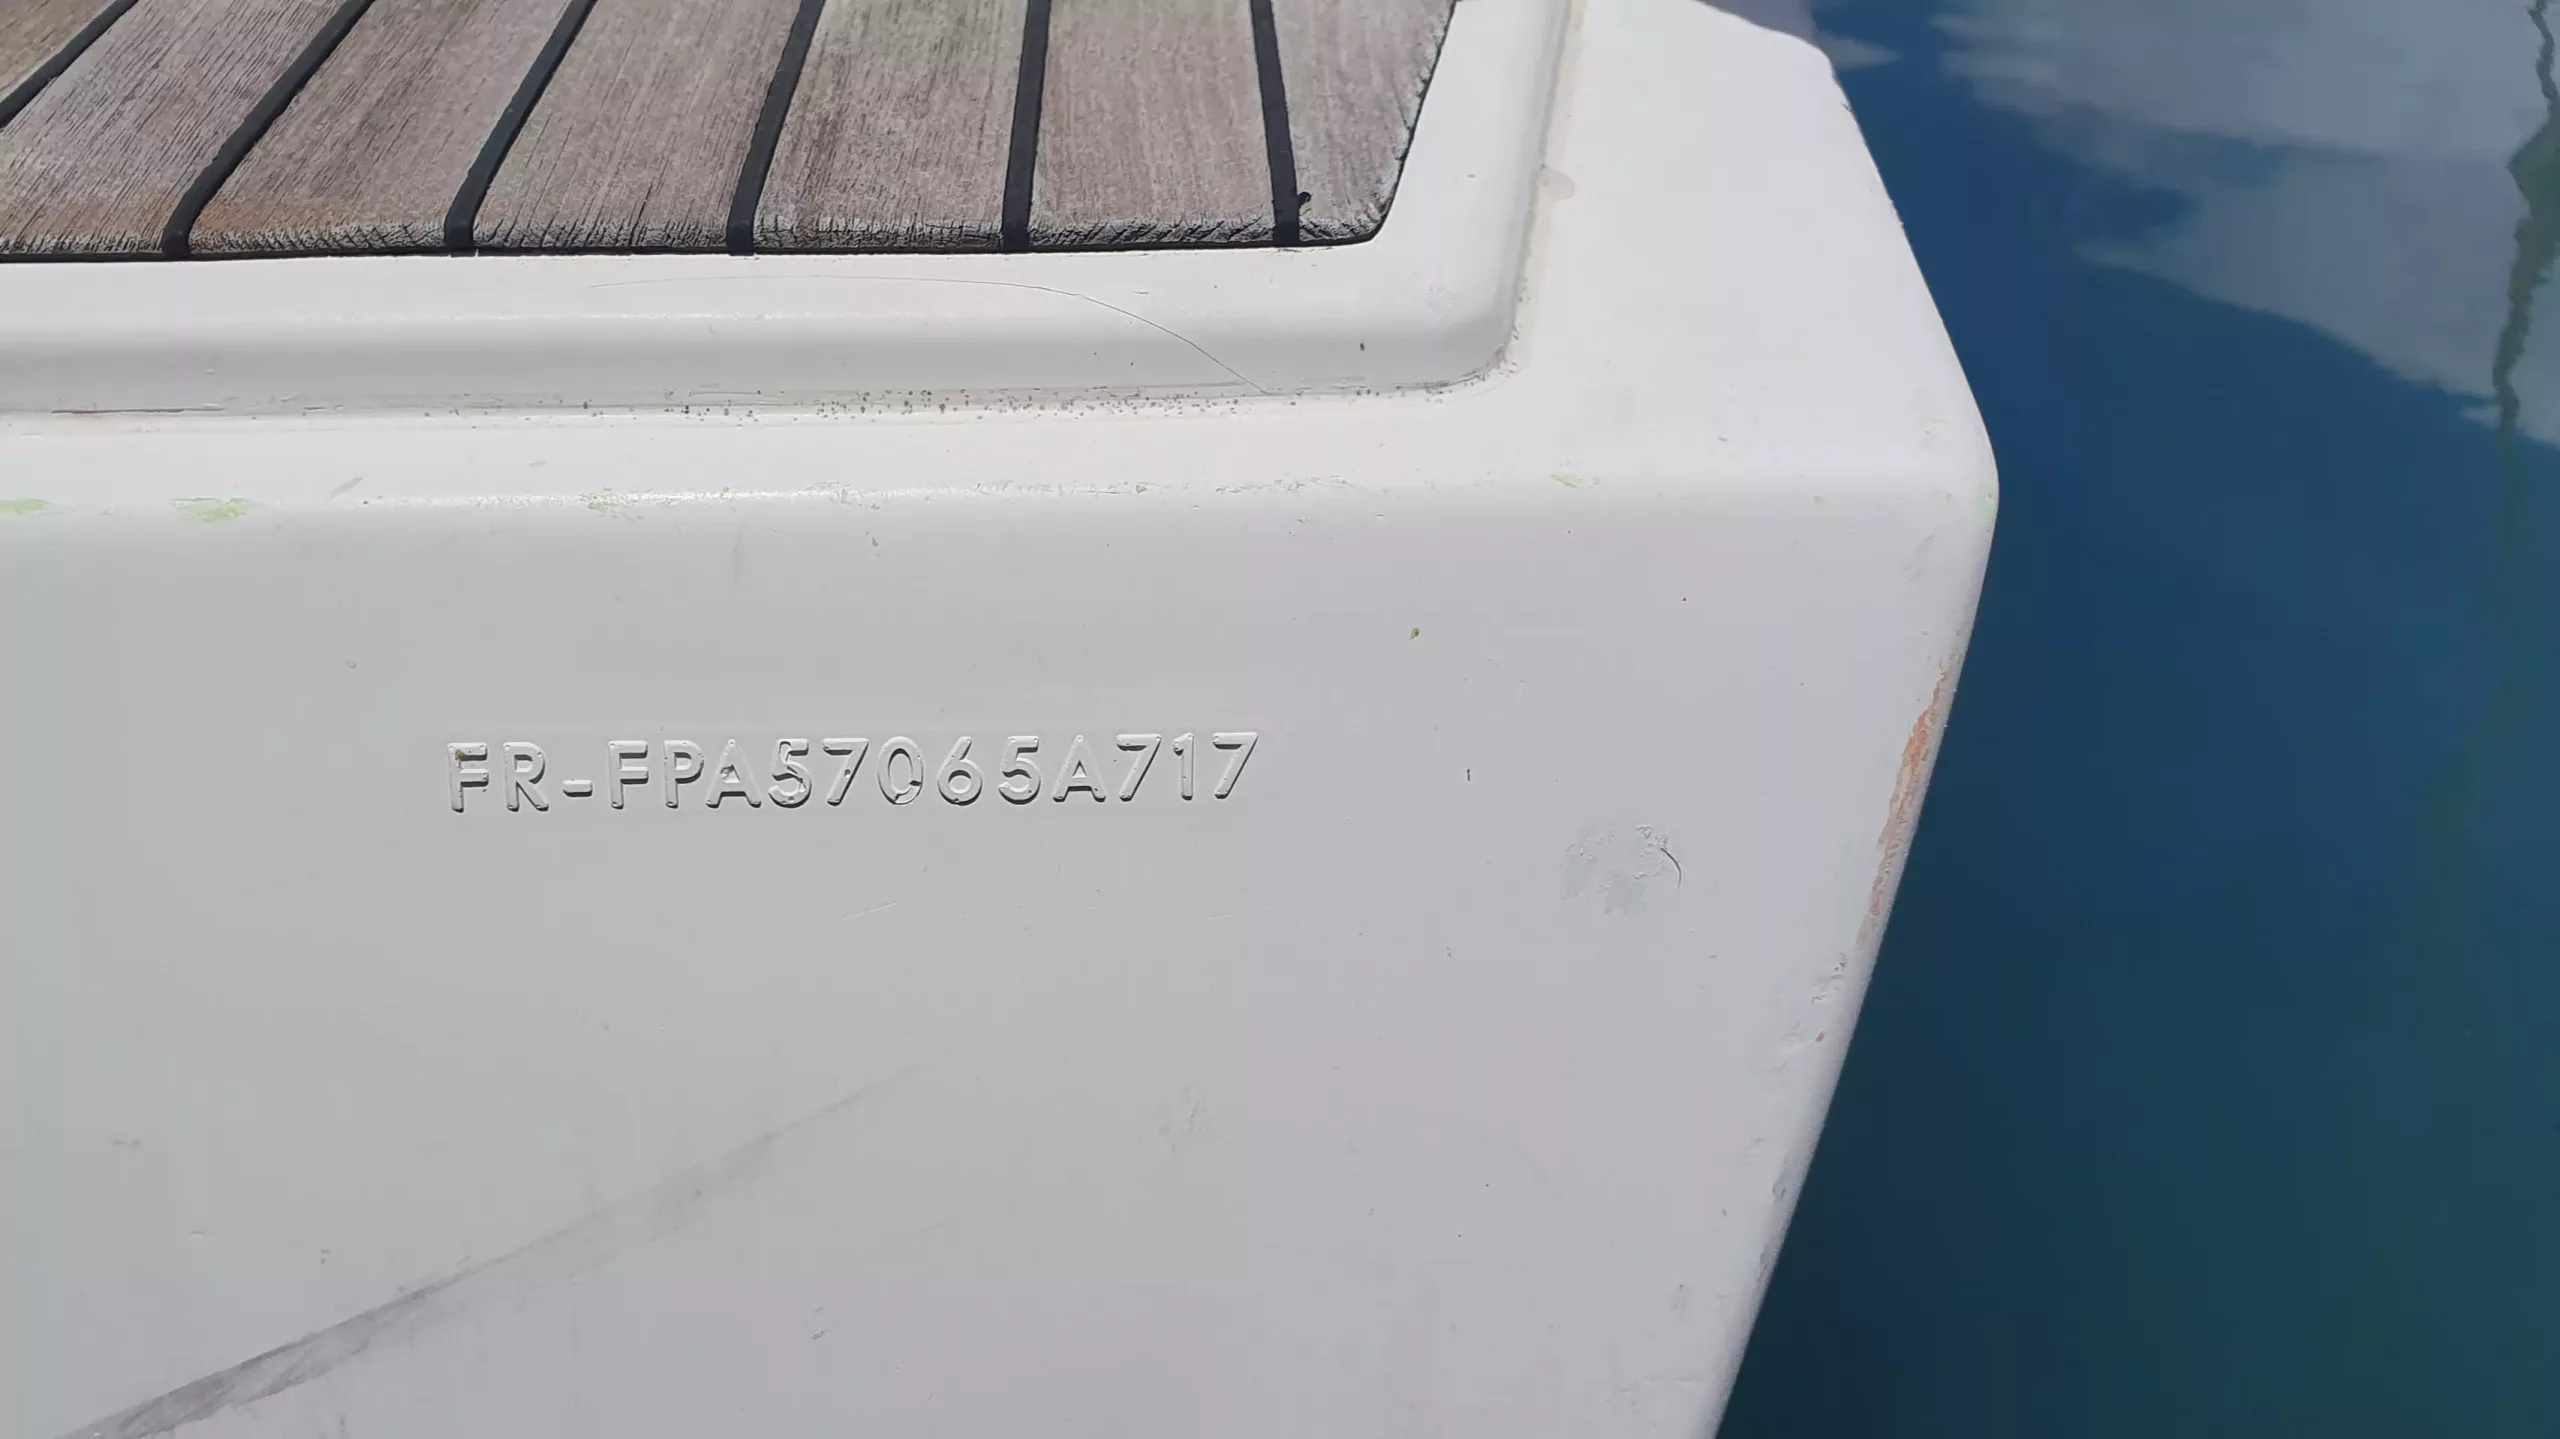 hull identification number